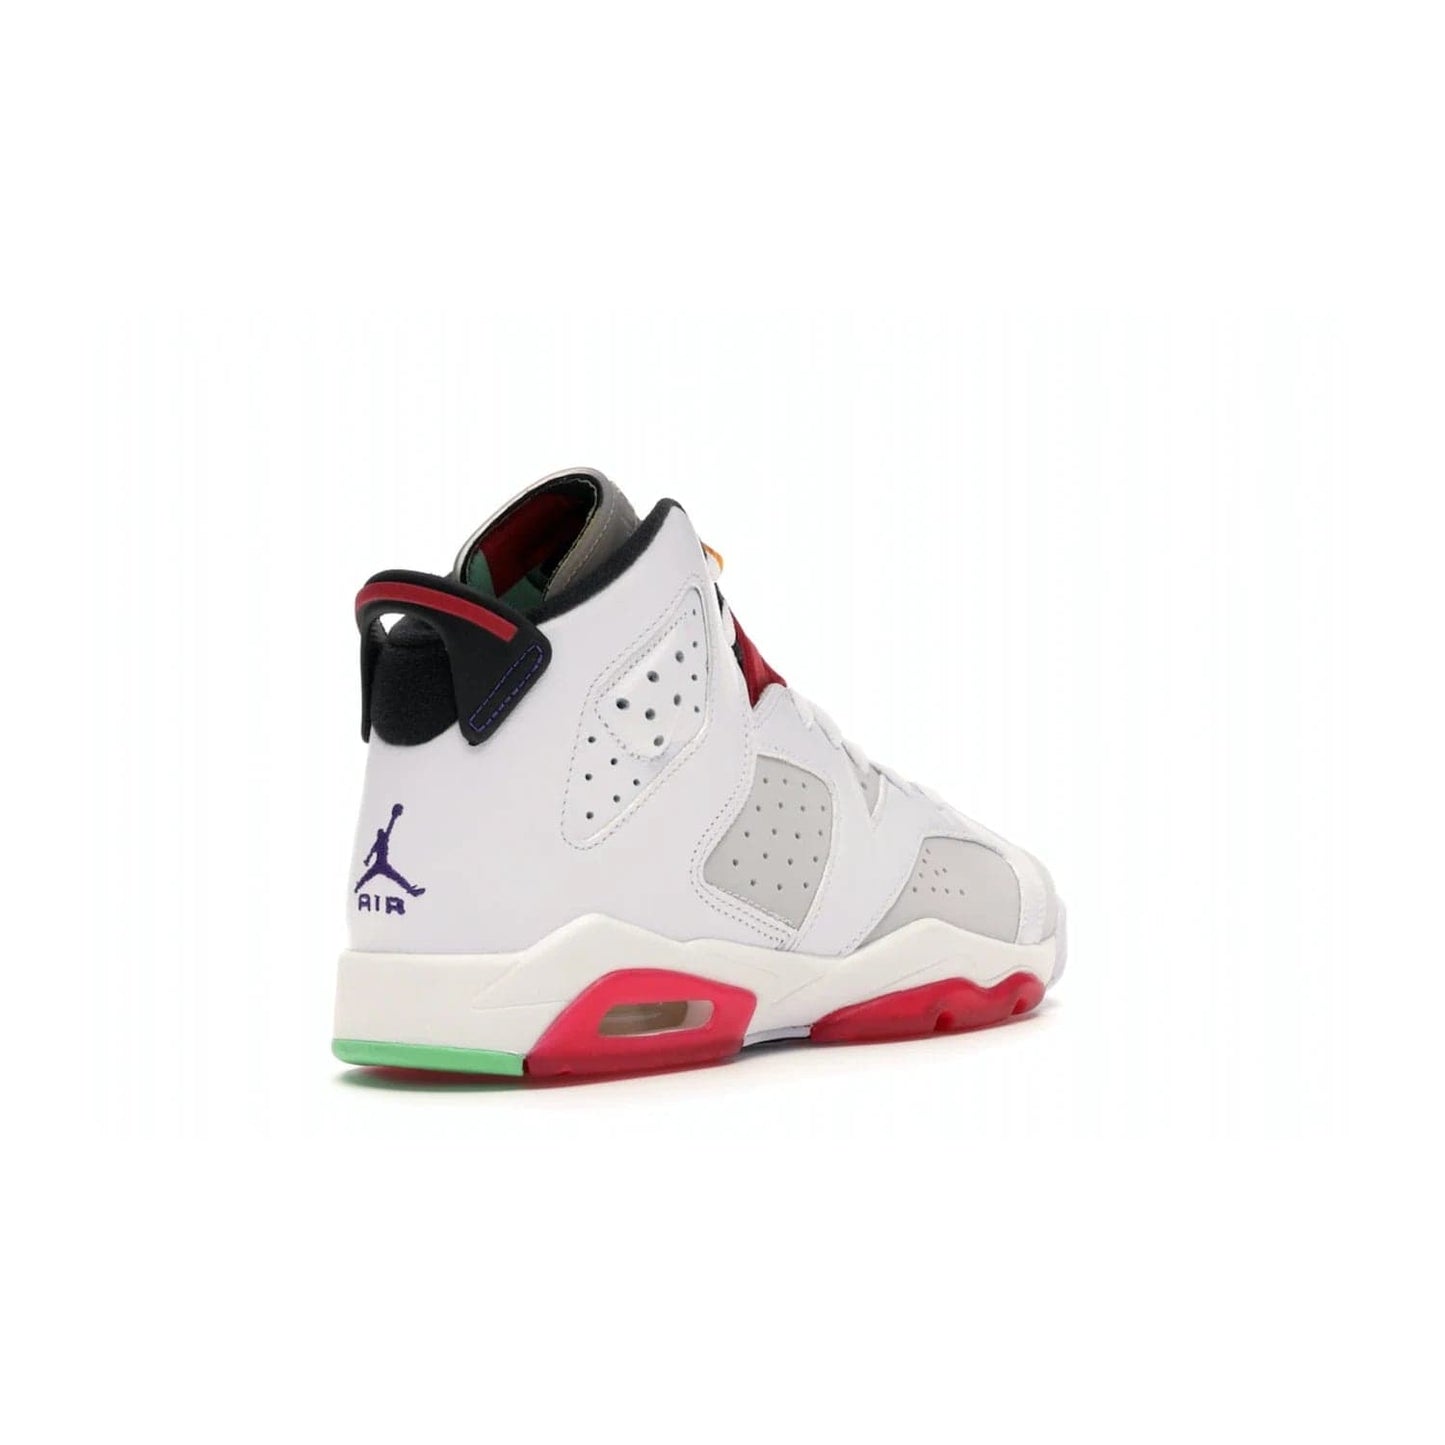 Jordan 6 Retro Hare (GS) - Image 32 - Only at www.BallersClubKickz.com - The Air Jordan 6 Hare GS. Comfortable suede upper, perforations, red pods, two-tone midsole, and signature "Jumpman" emblem. Released 17 June 2020. Perfect for any sneakerhead.